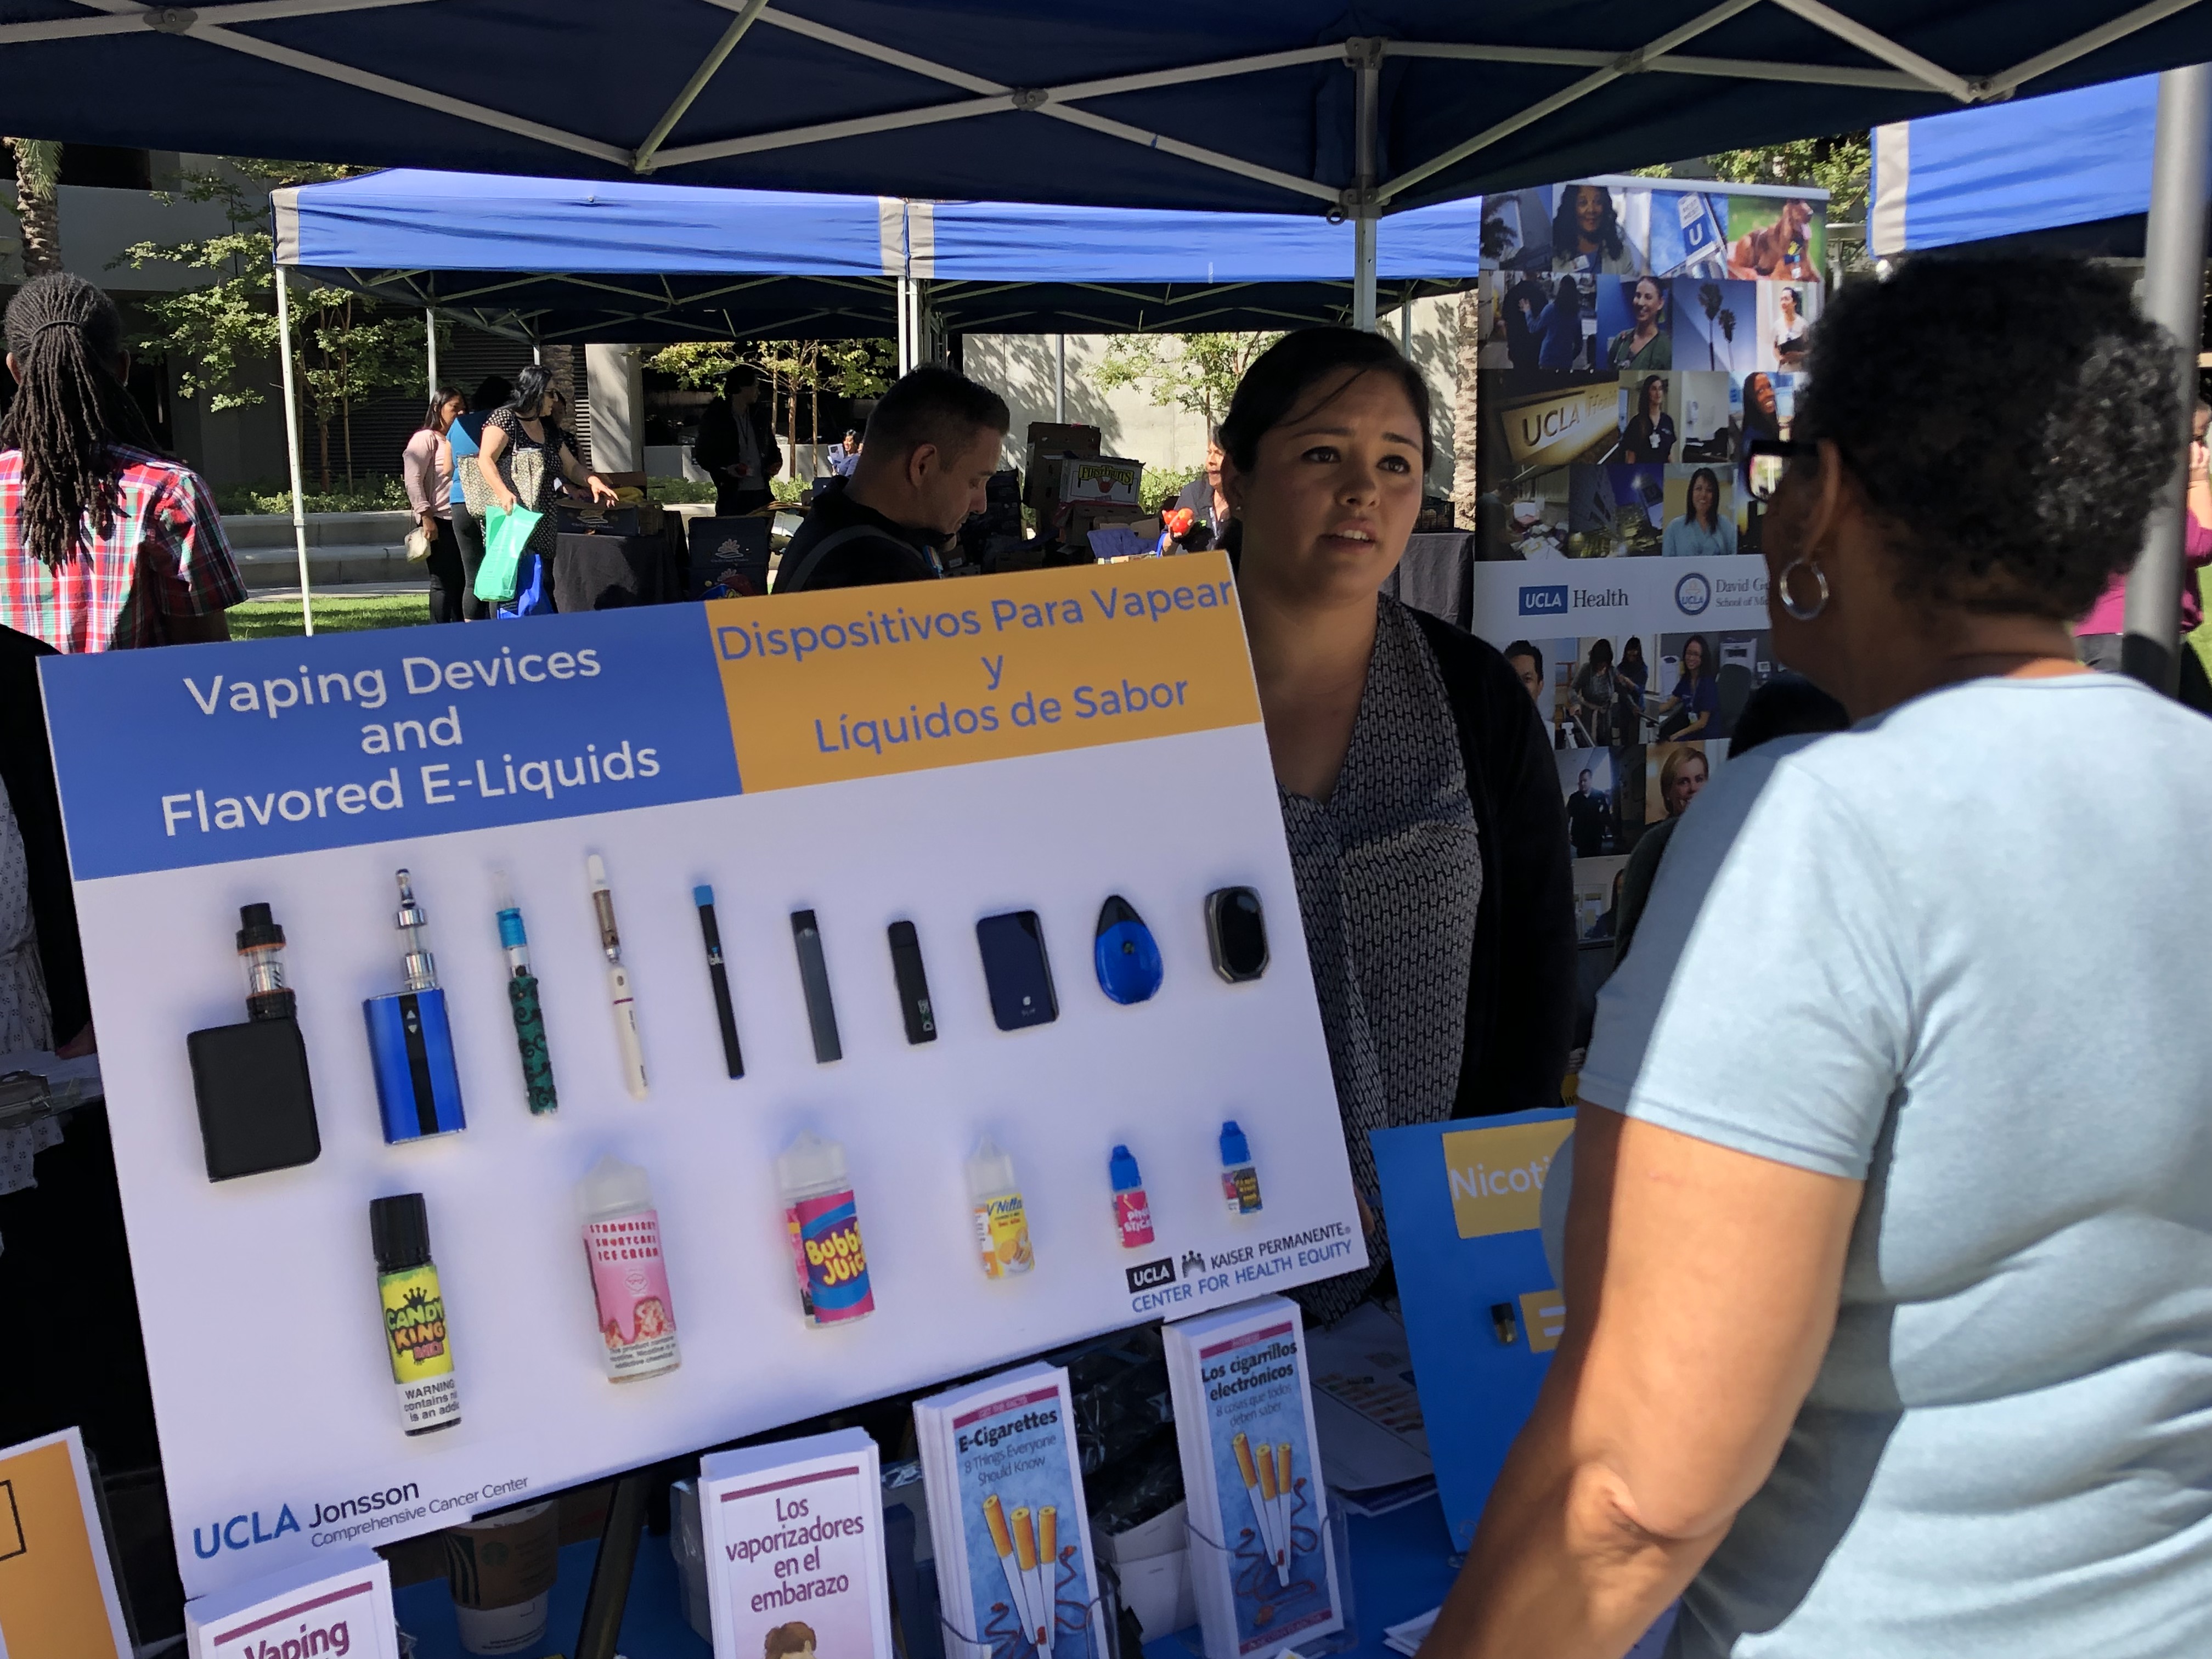 How to Prevent Cancer Via Lifestyle Choices. People review information on vaping at a health fair